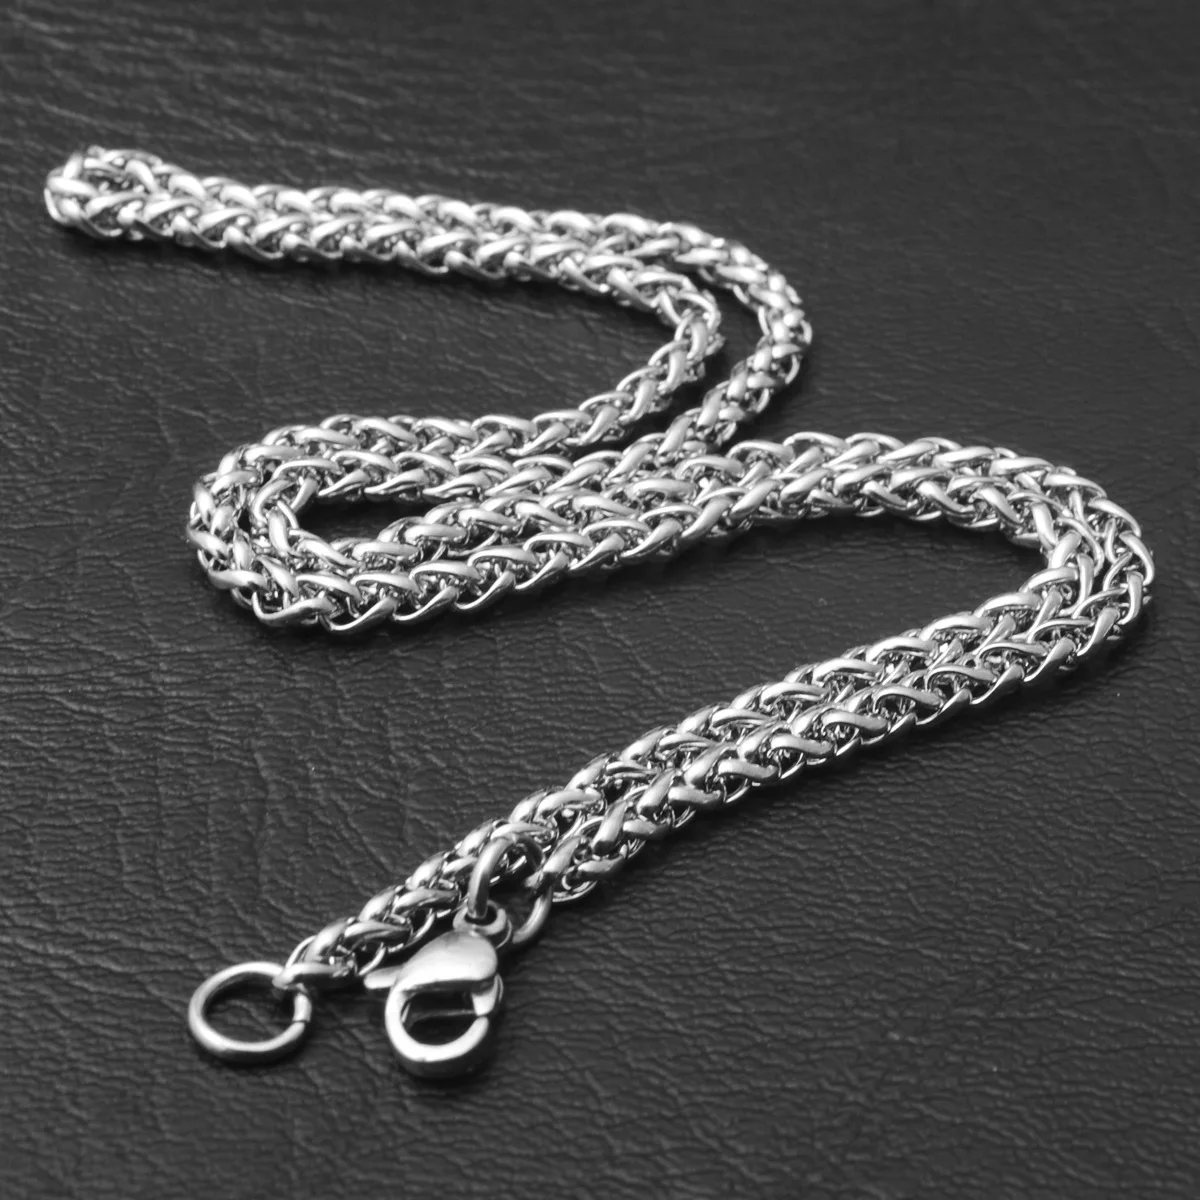 Wholesale Wholesale 316L Stainless Steel Gold Chain Customized Personalized  Long Chain Necklace For Men Women From m.